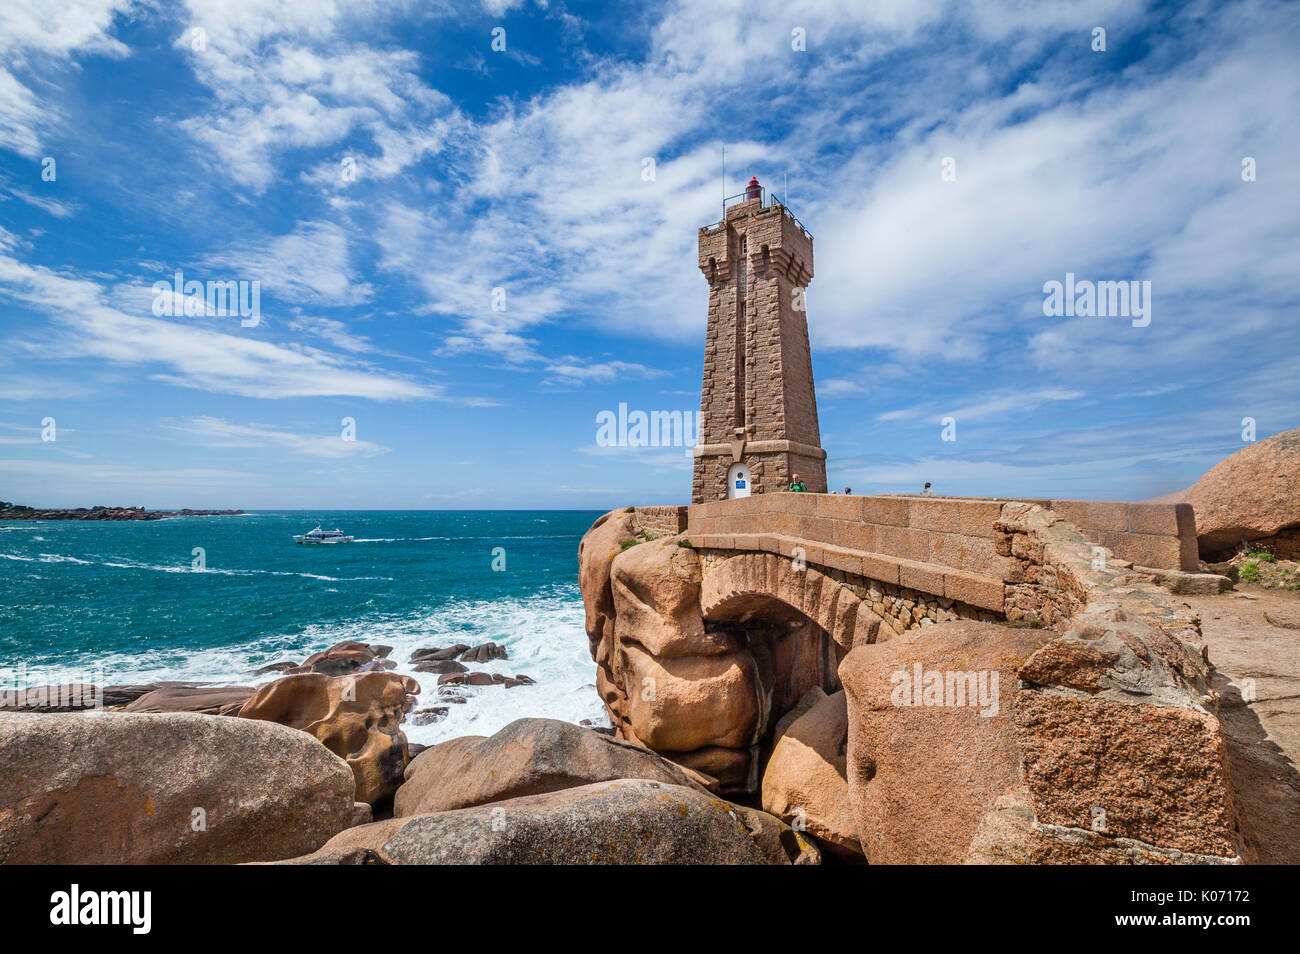 France, Brittany, Cotes d'Armor department, Cote de Granit Rose, Ploumanac'h lighthouse at the Sentier des Douaniers (old customs officers Path) on th Stock Photo